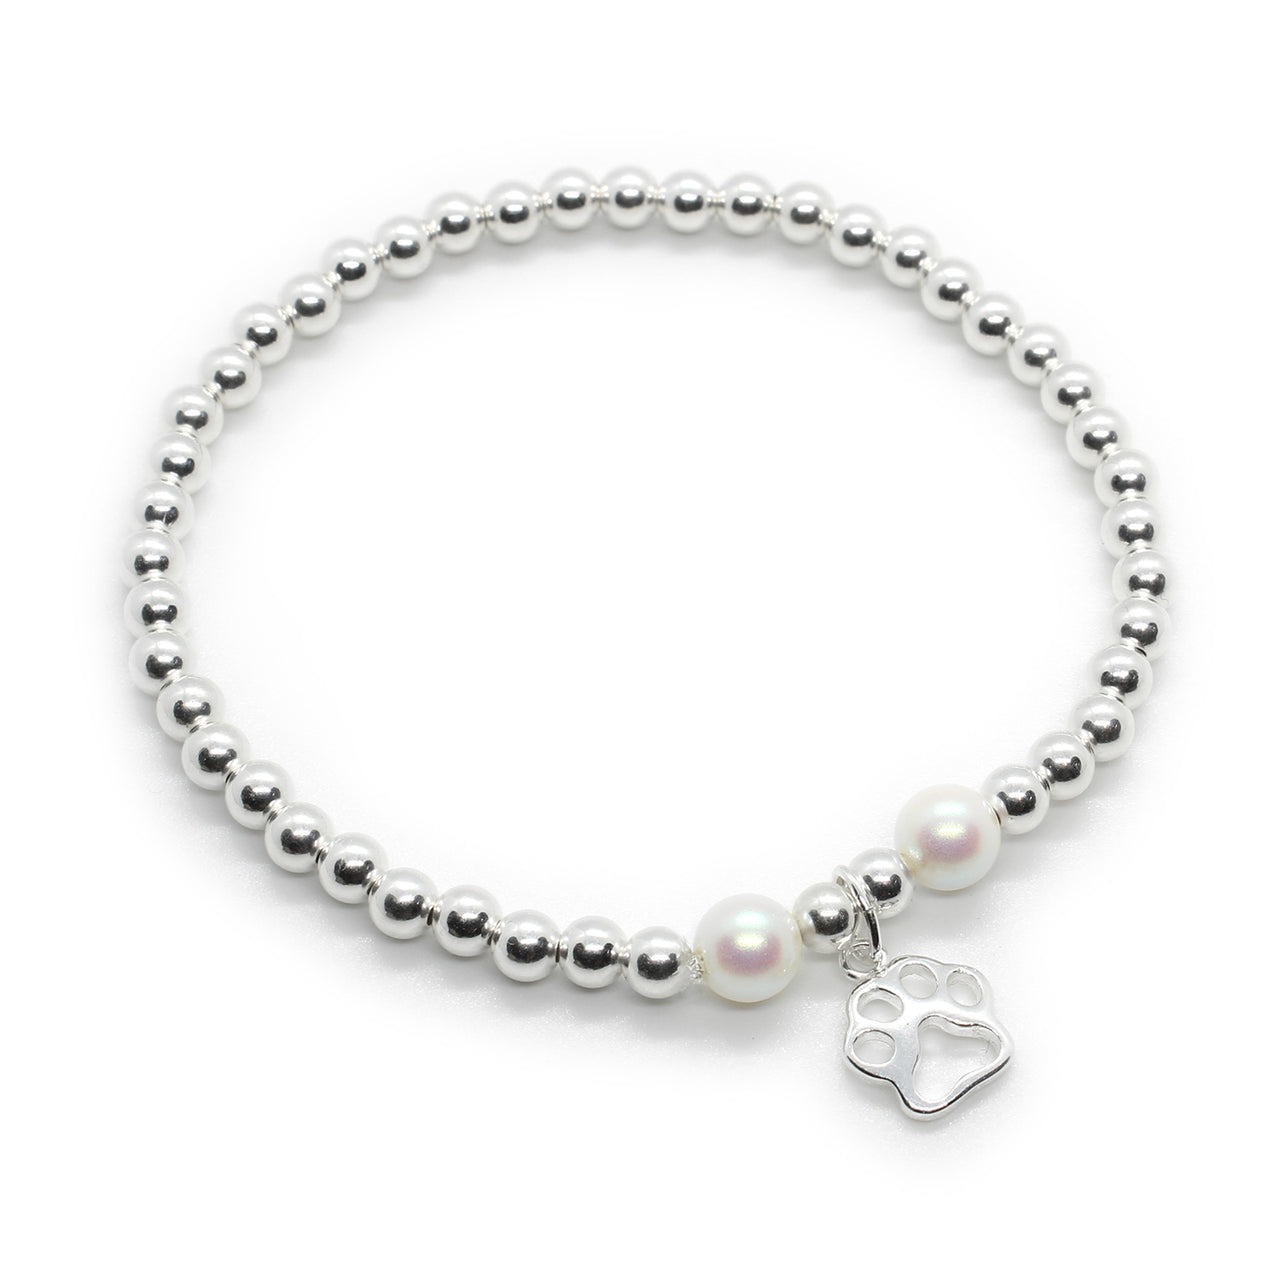 Paw/Pet Loss Sterling Silver and Pearl Bracelet